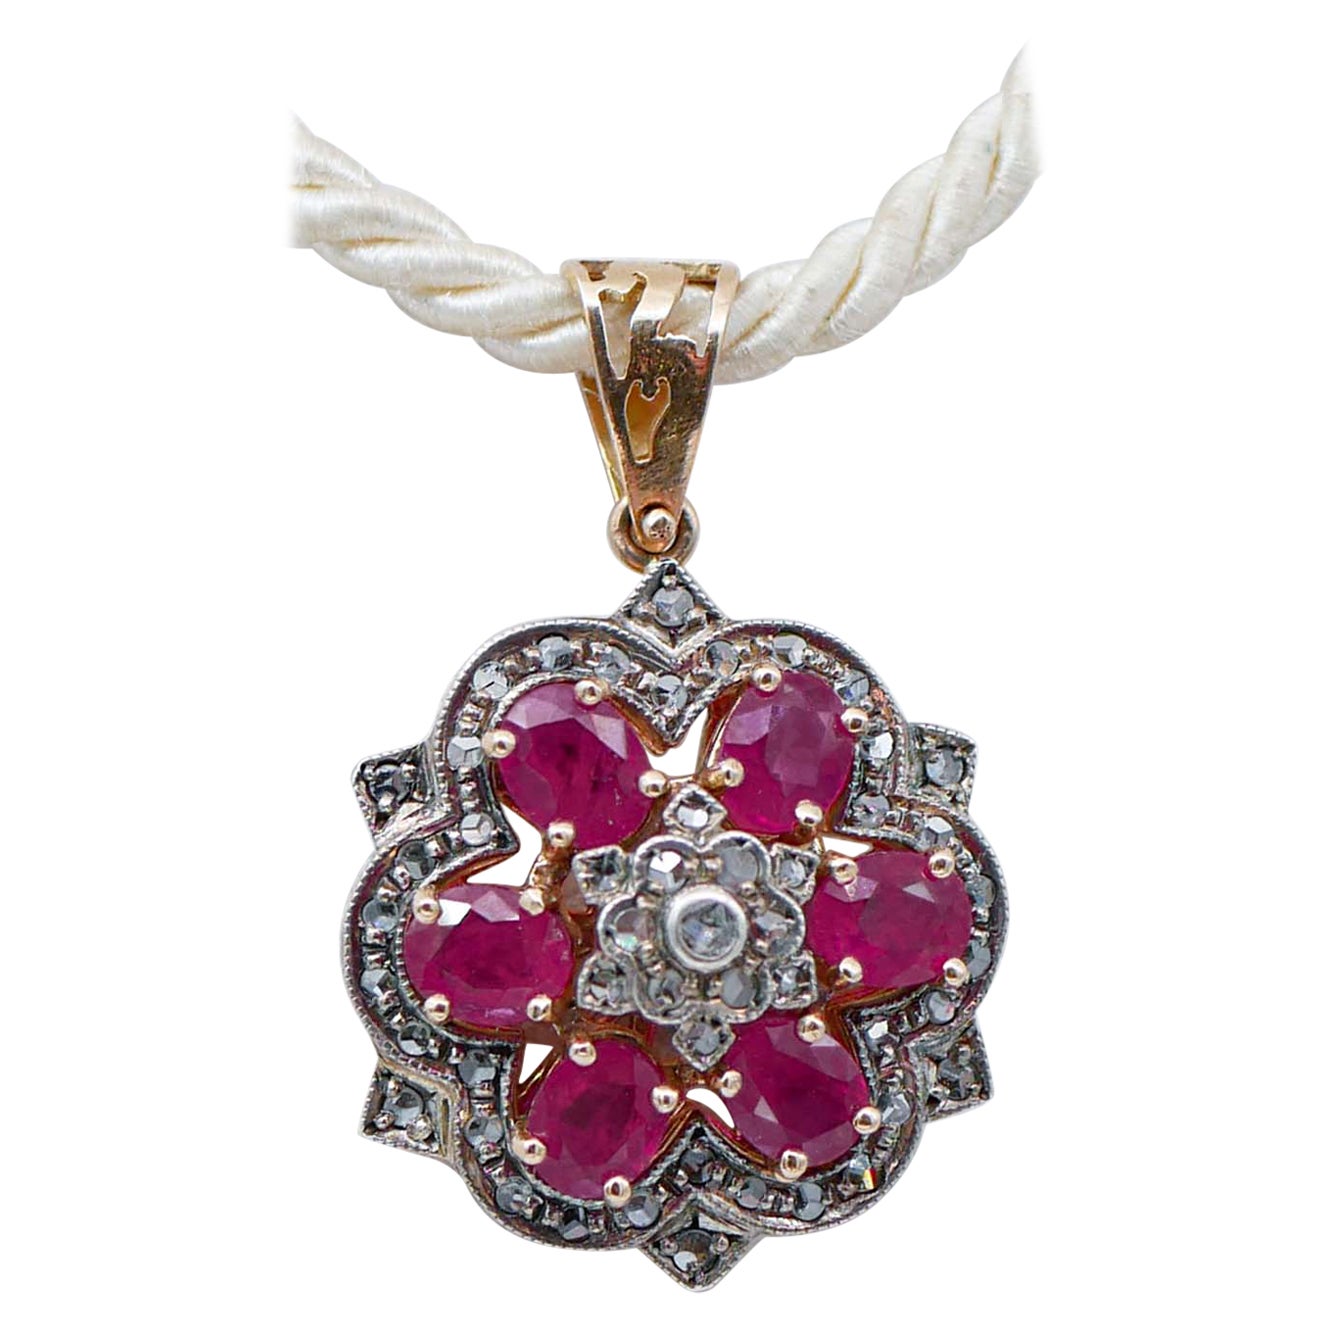 Rubies, Diamonds, 14 Karat Rose Gold and Silver Pendant Necklace. For Sale